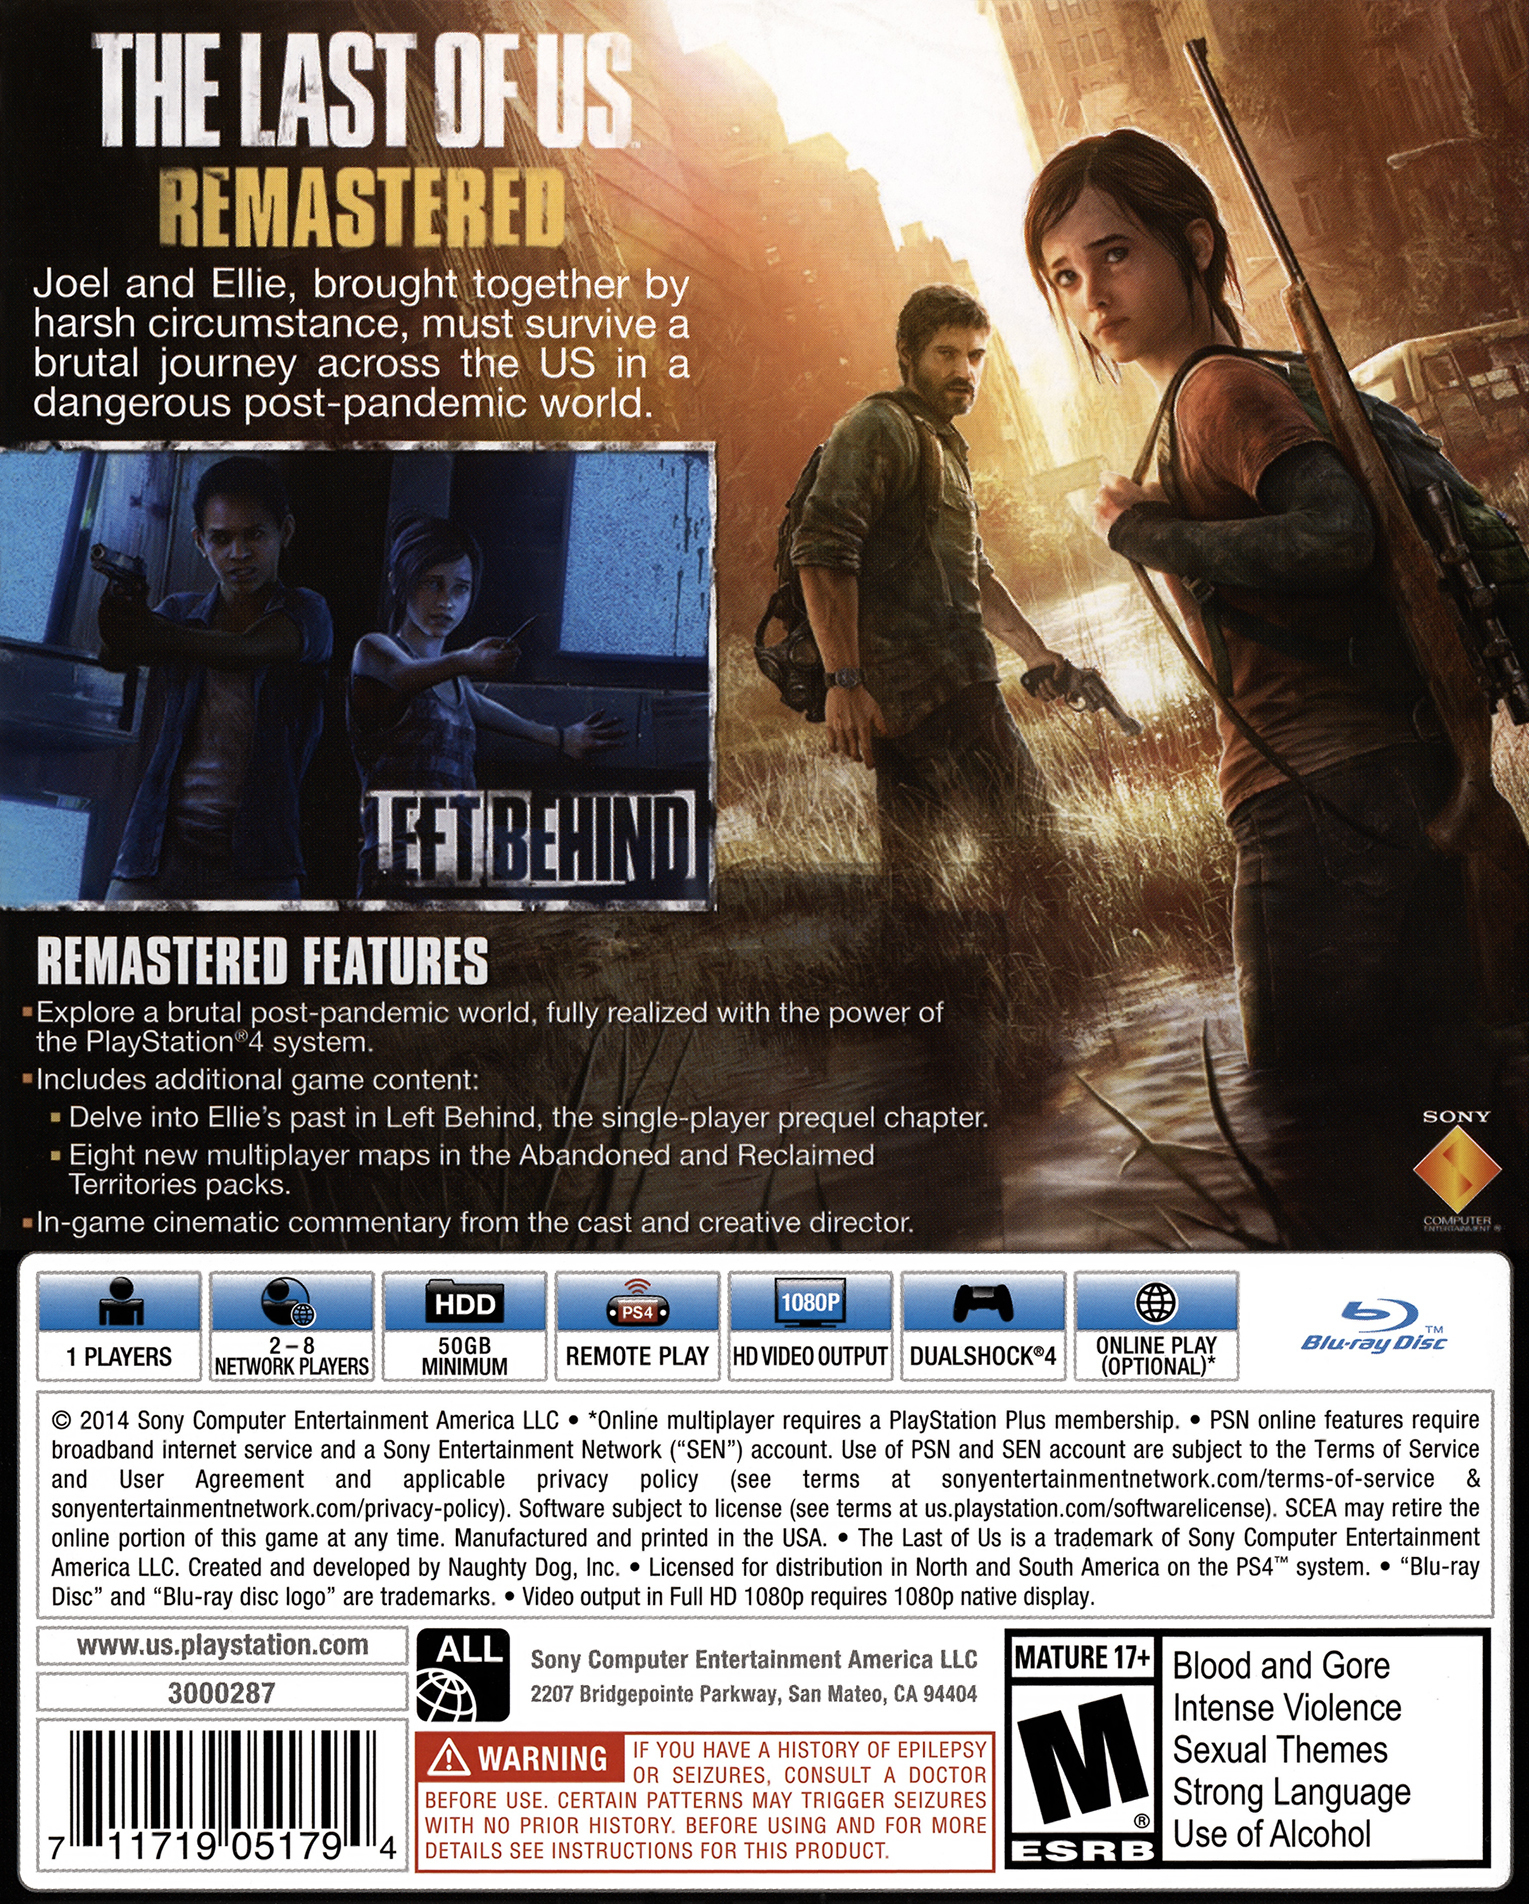 The Last of Us Cheats For PlayStation 3 PlayStation 4 - GameSpot